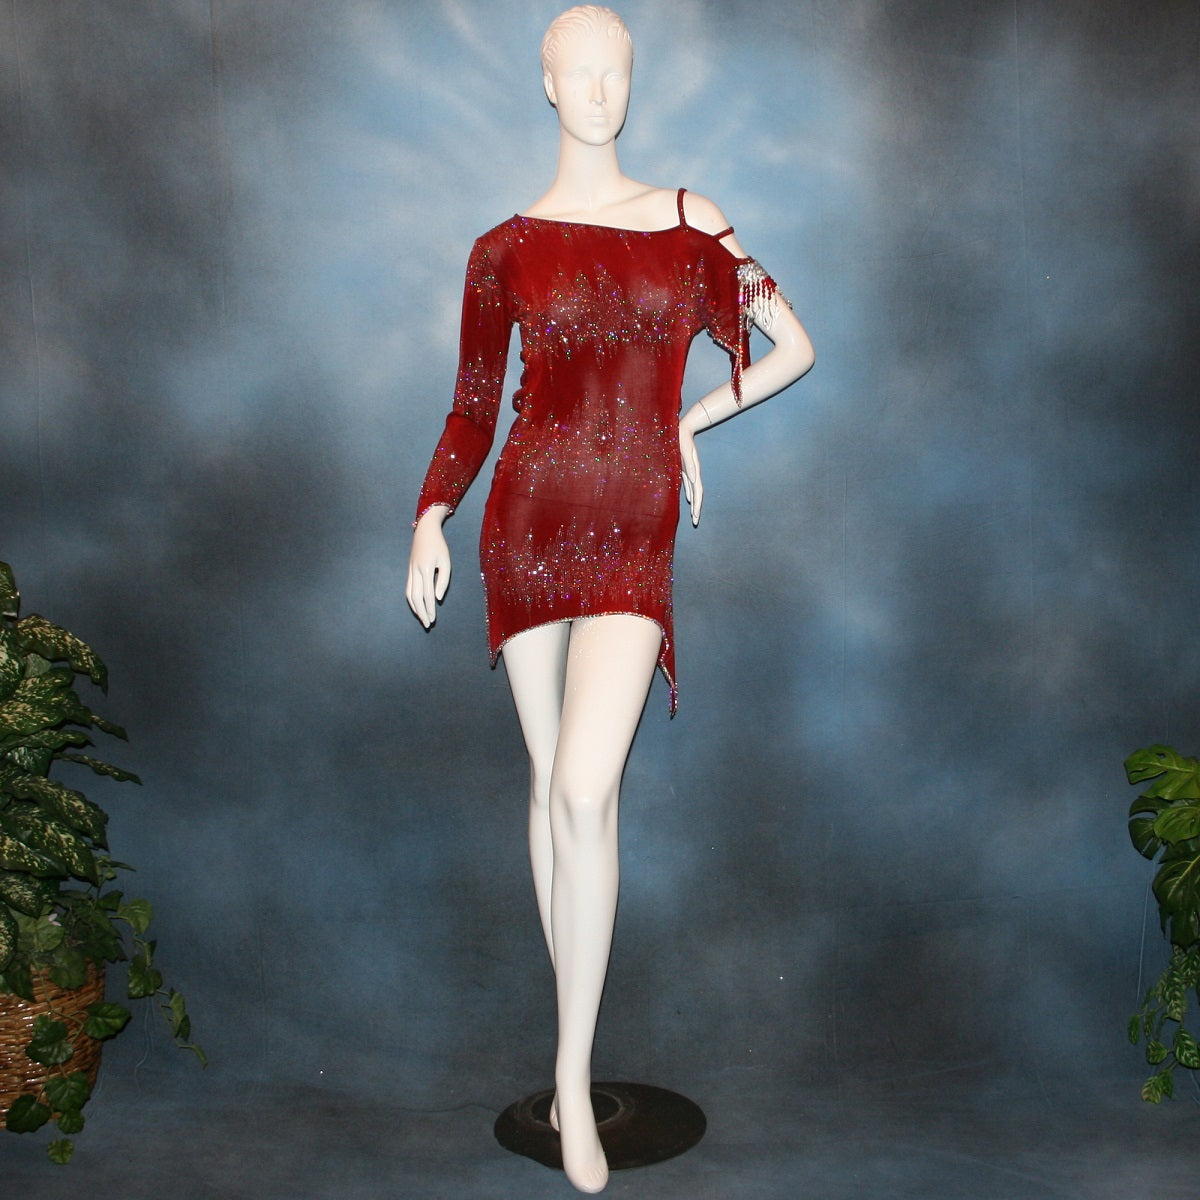 Deep scarlette red Latin rhythm dress created in glitter slinky with an awesome electrifying glitter pattern features lattice detailing in the sides, one long sleeve & interesting detailing on the opposite shoulder with Swarovski hand beading & Crystal Ab rhinestone work edging the skirting, split cape sleeve & long sleeve.